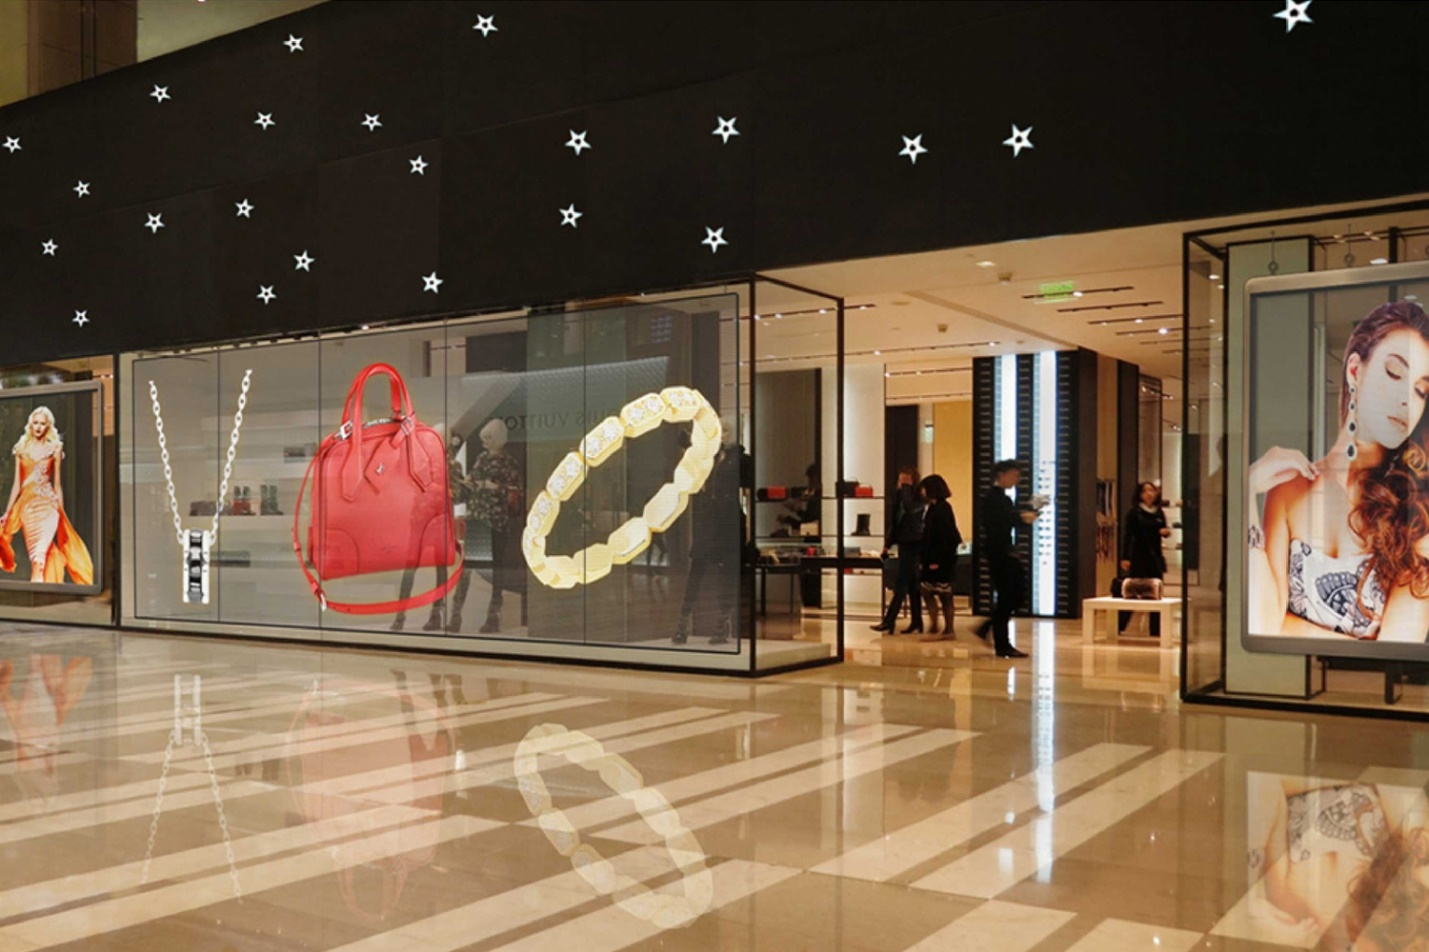 The Transparent LED Display Panel: A Change in Visual Communication